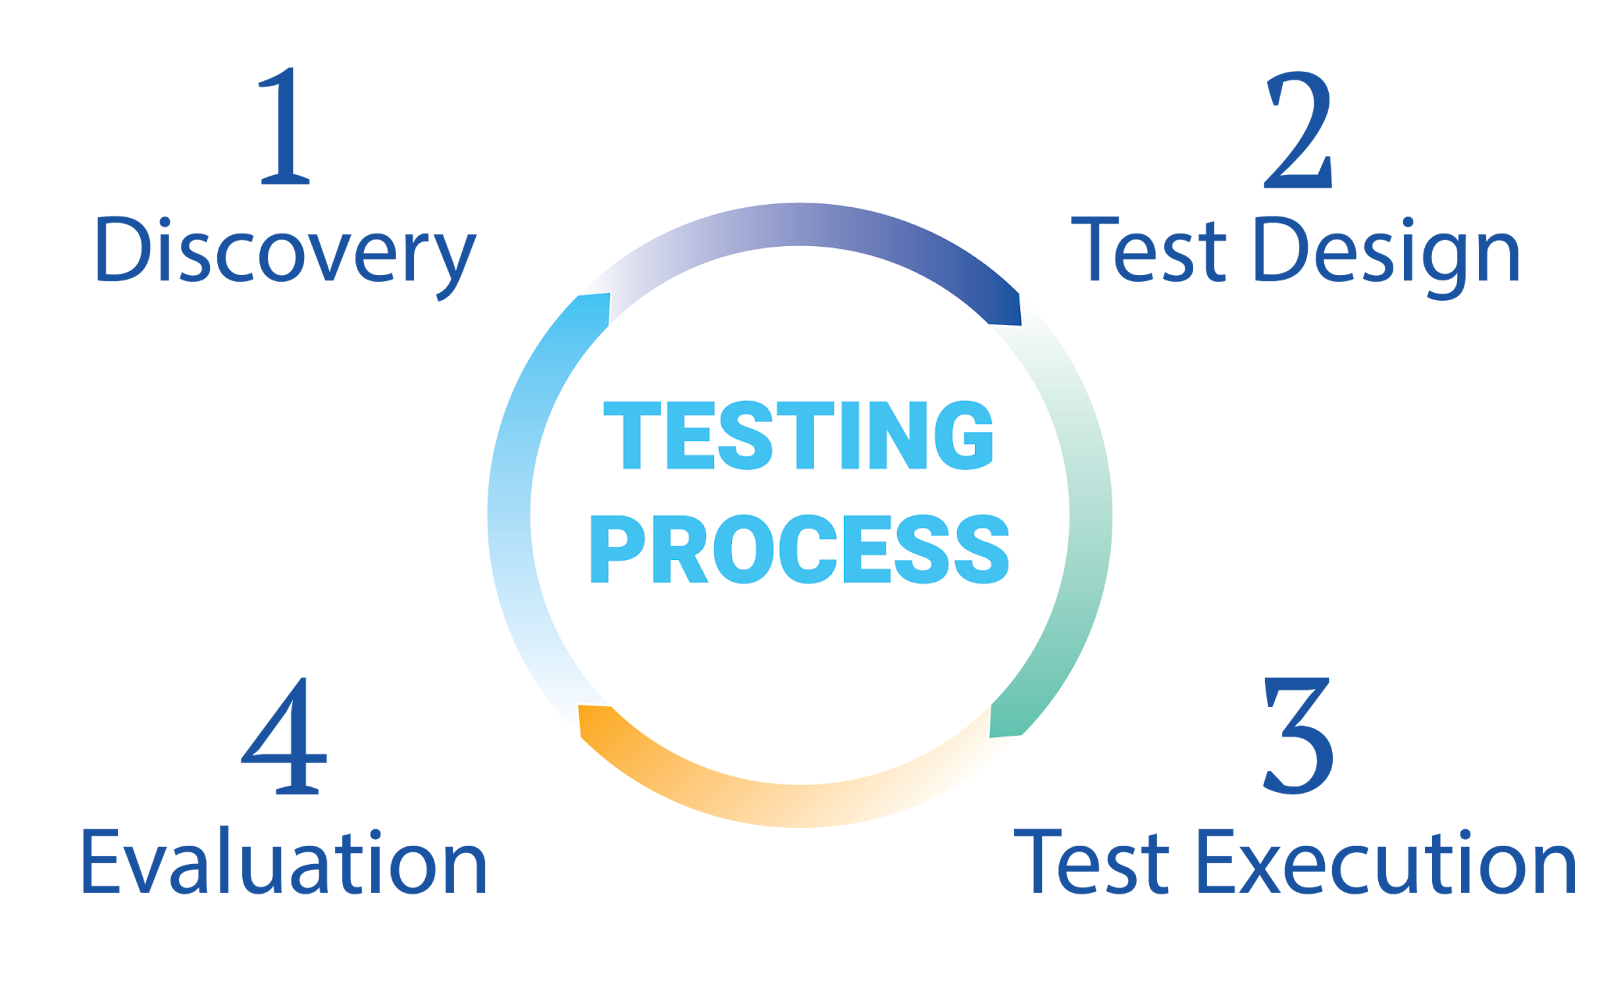 The traditional testing process should include discovery, test design, test execution, and evaluation.